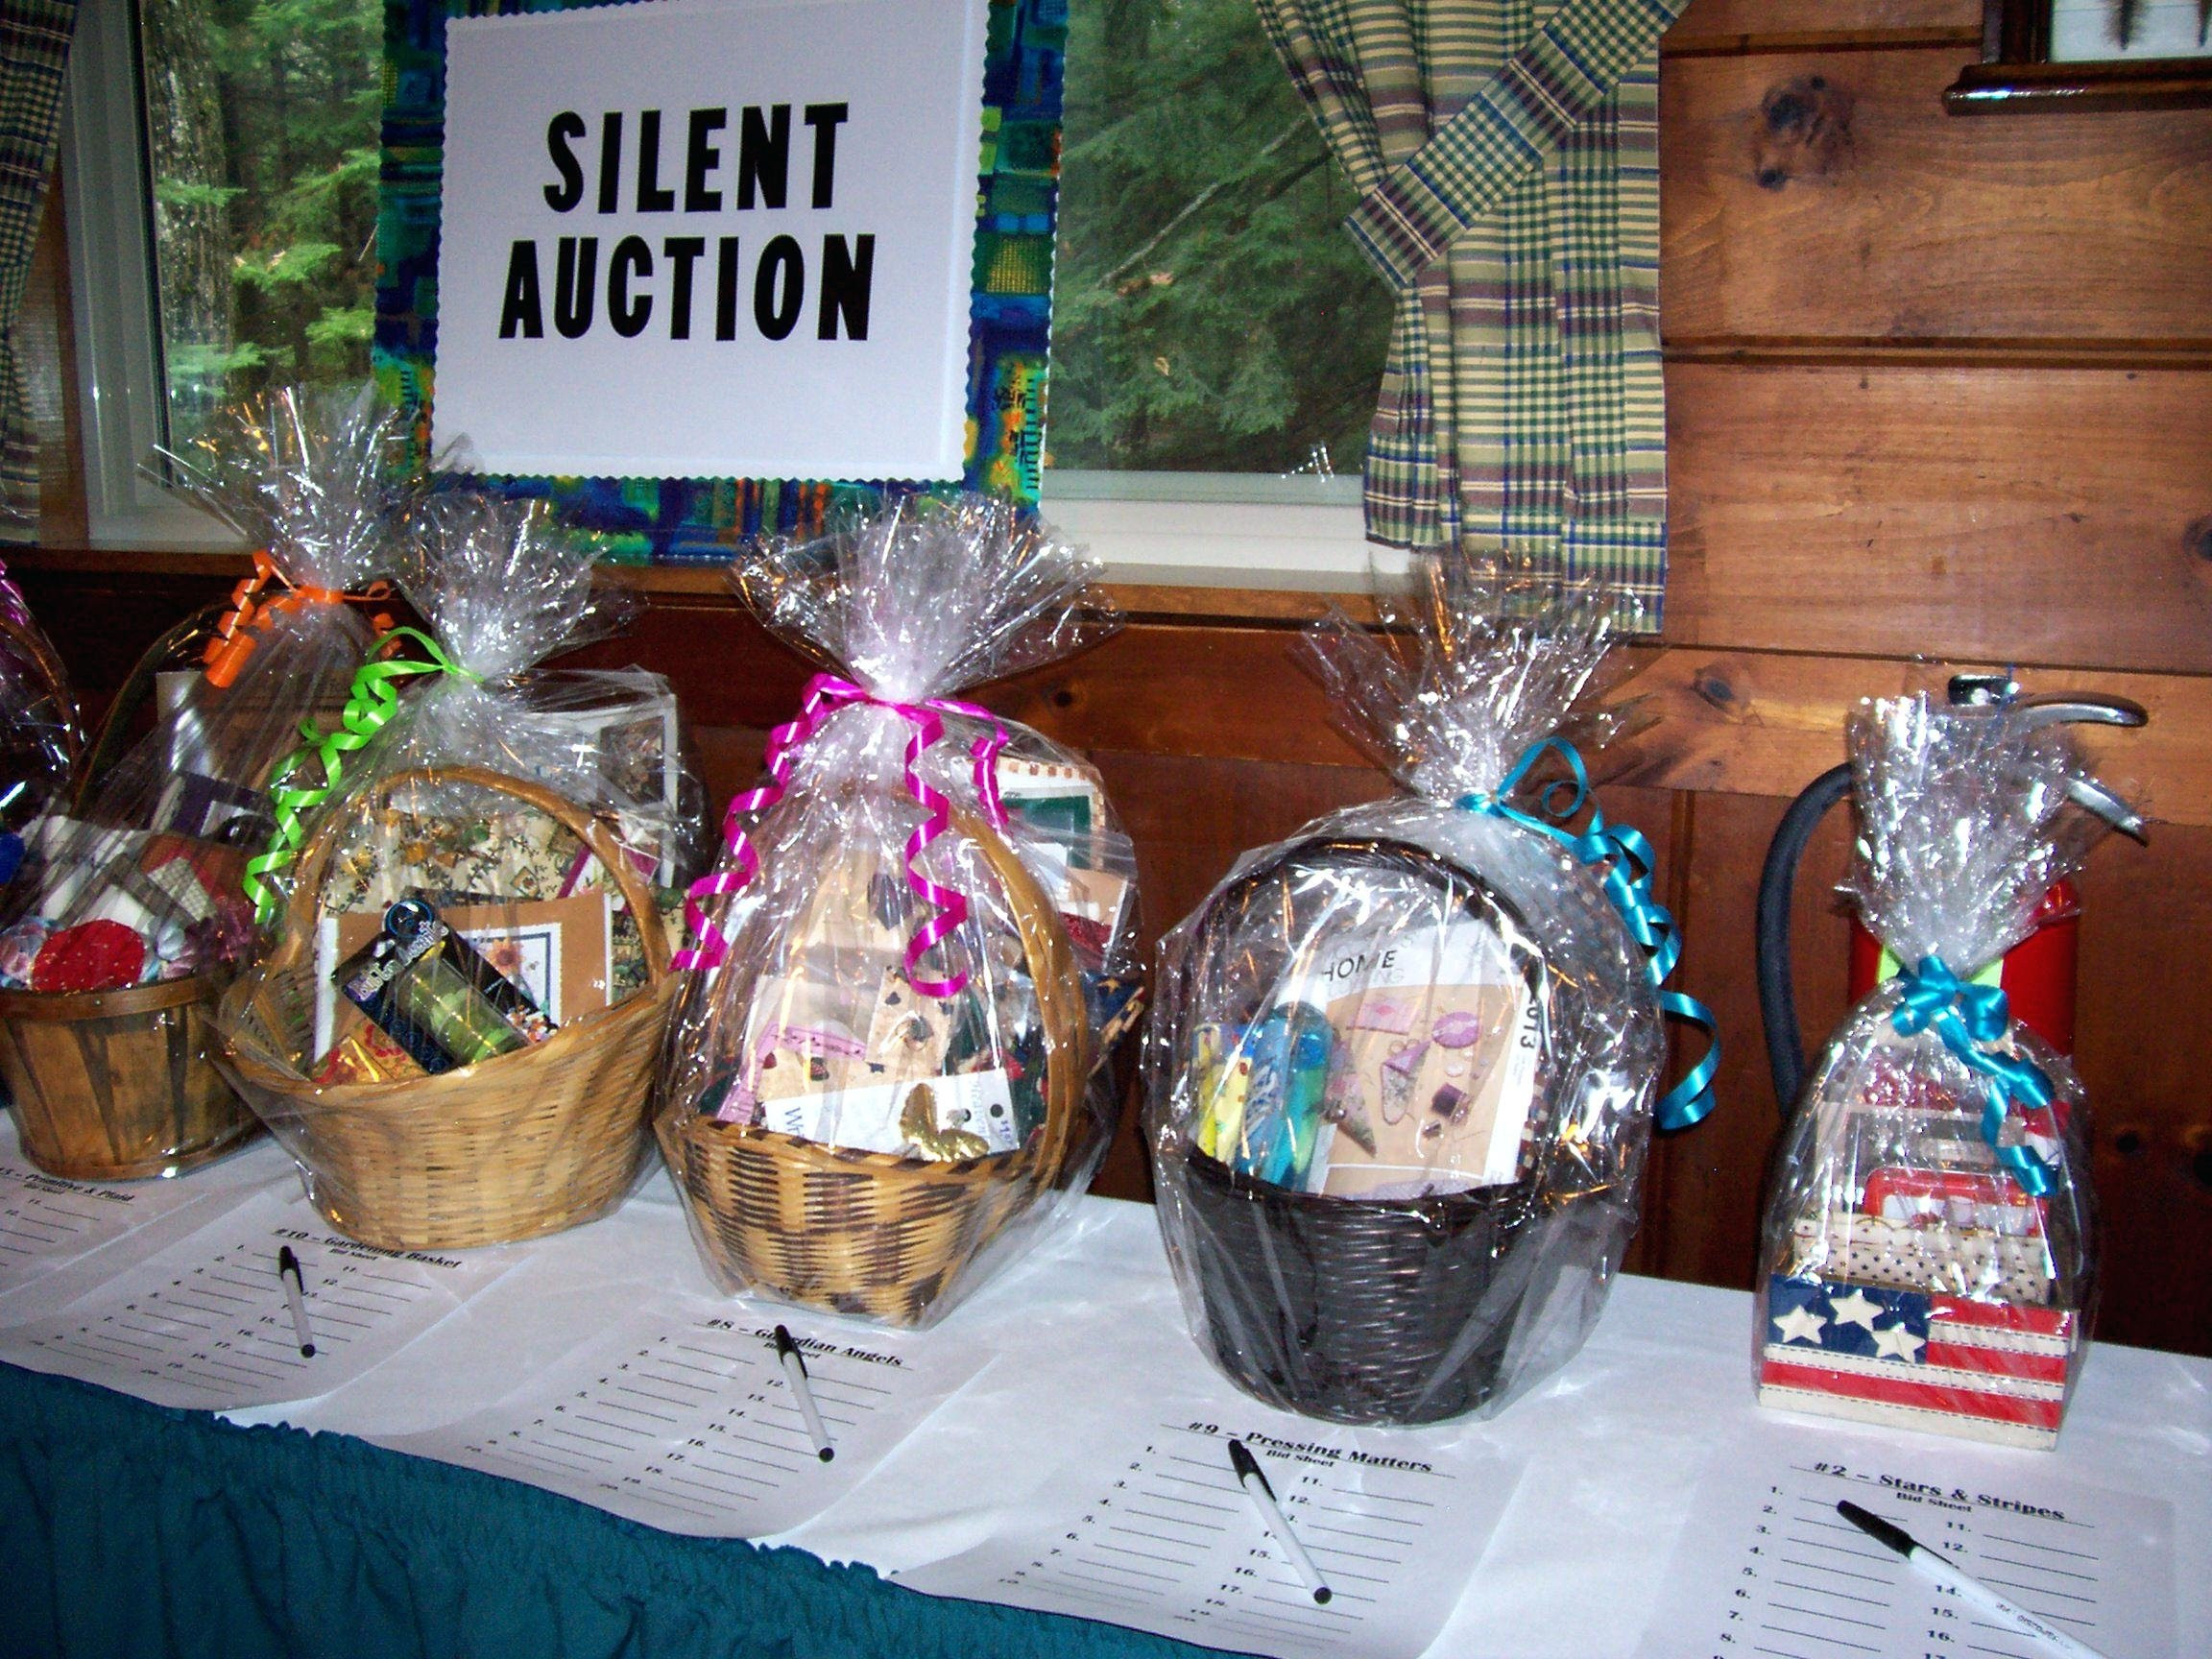 Ideas For Gift Baskets To Auction
 10 Cute Theme Basket Ideas For Silent Auction 2019